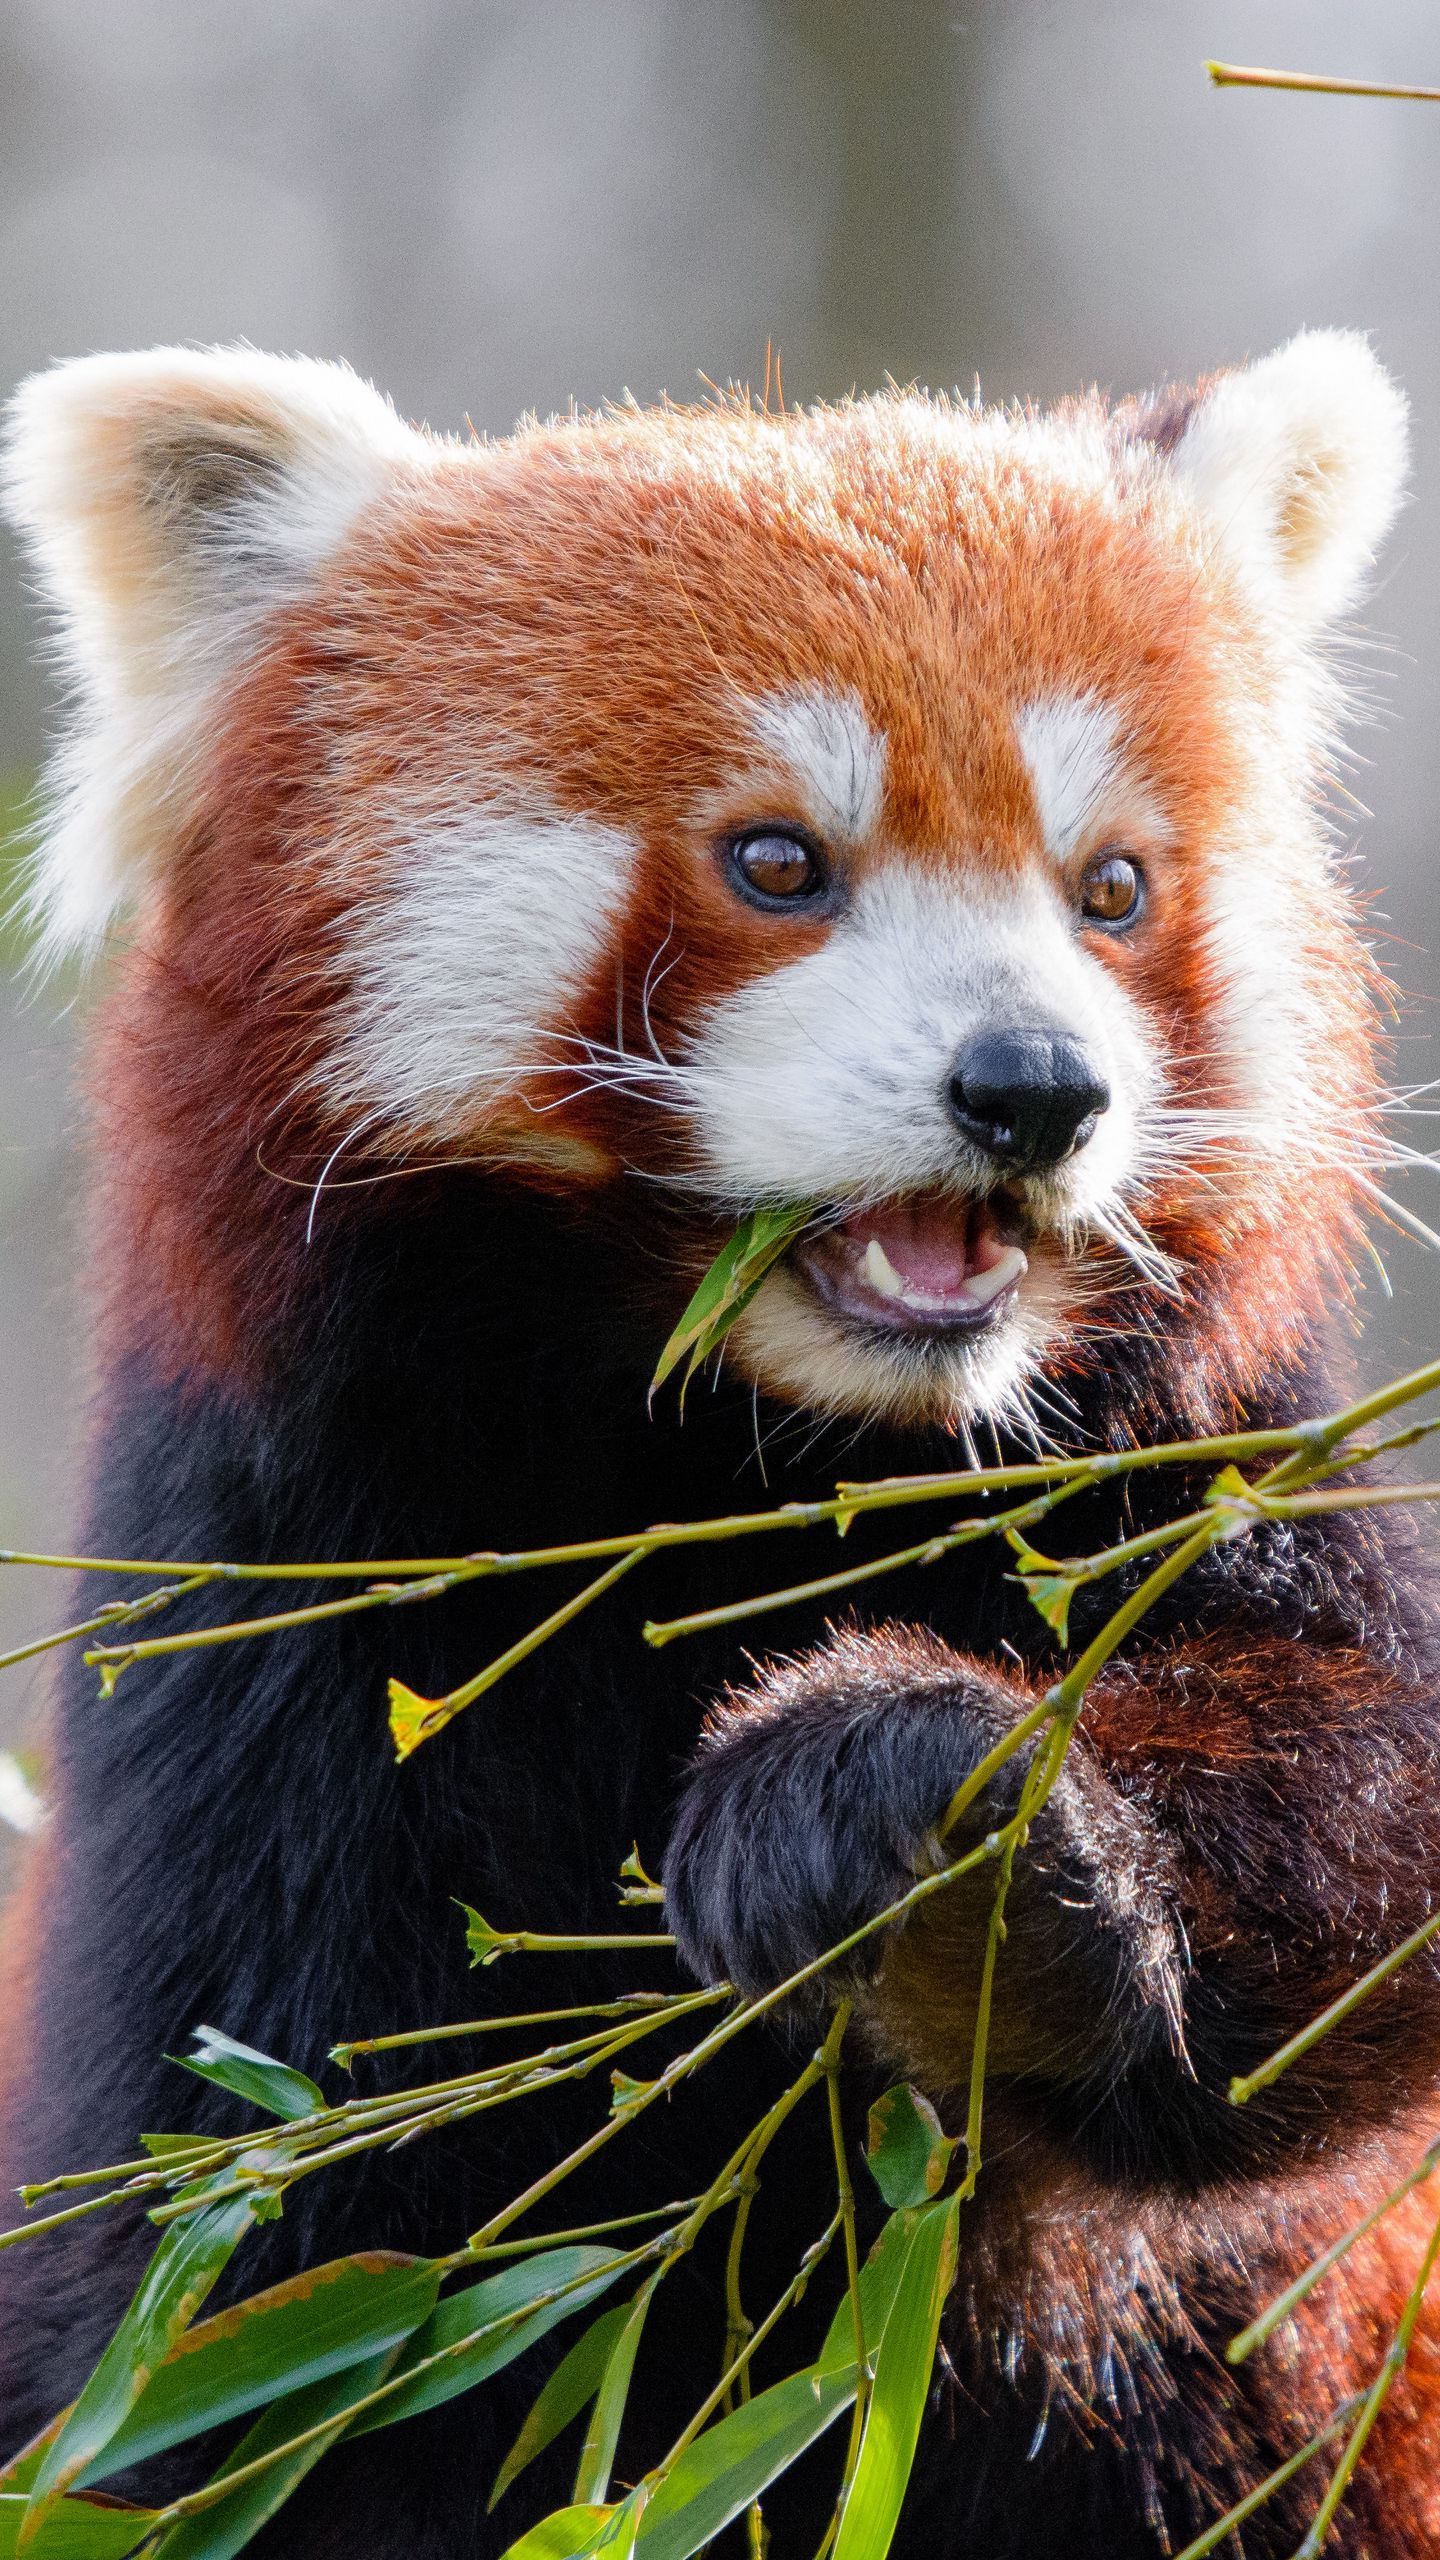 Download wallpaper 1440x2560 red panda, bamboo, cute, animal, leaves qhd samsung galaxy s s edge, note, lg g4 HD background